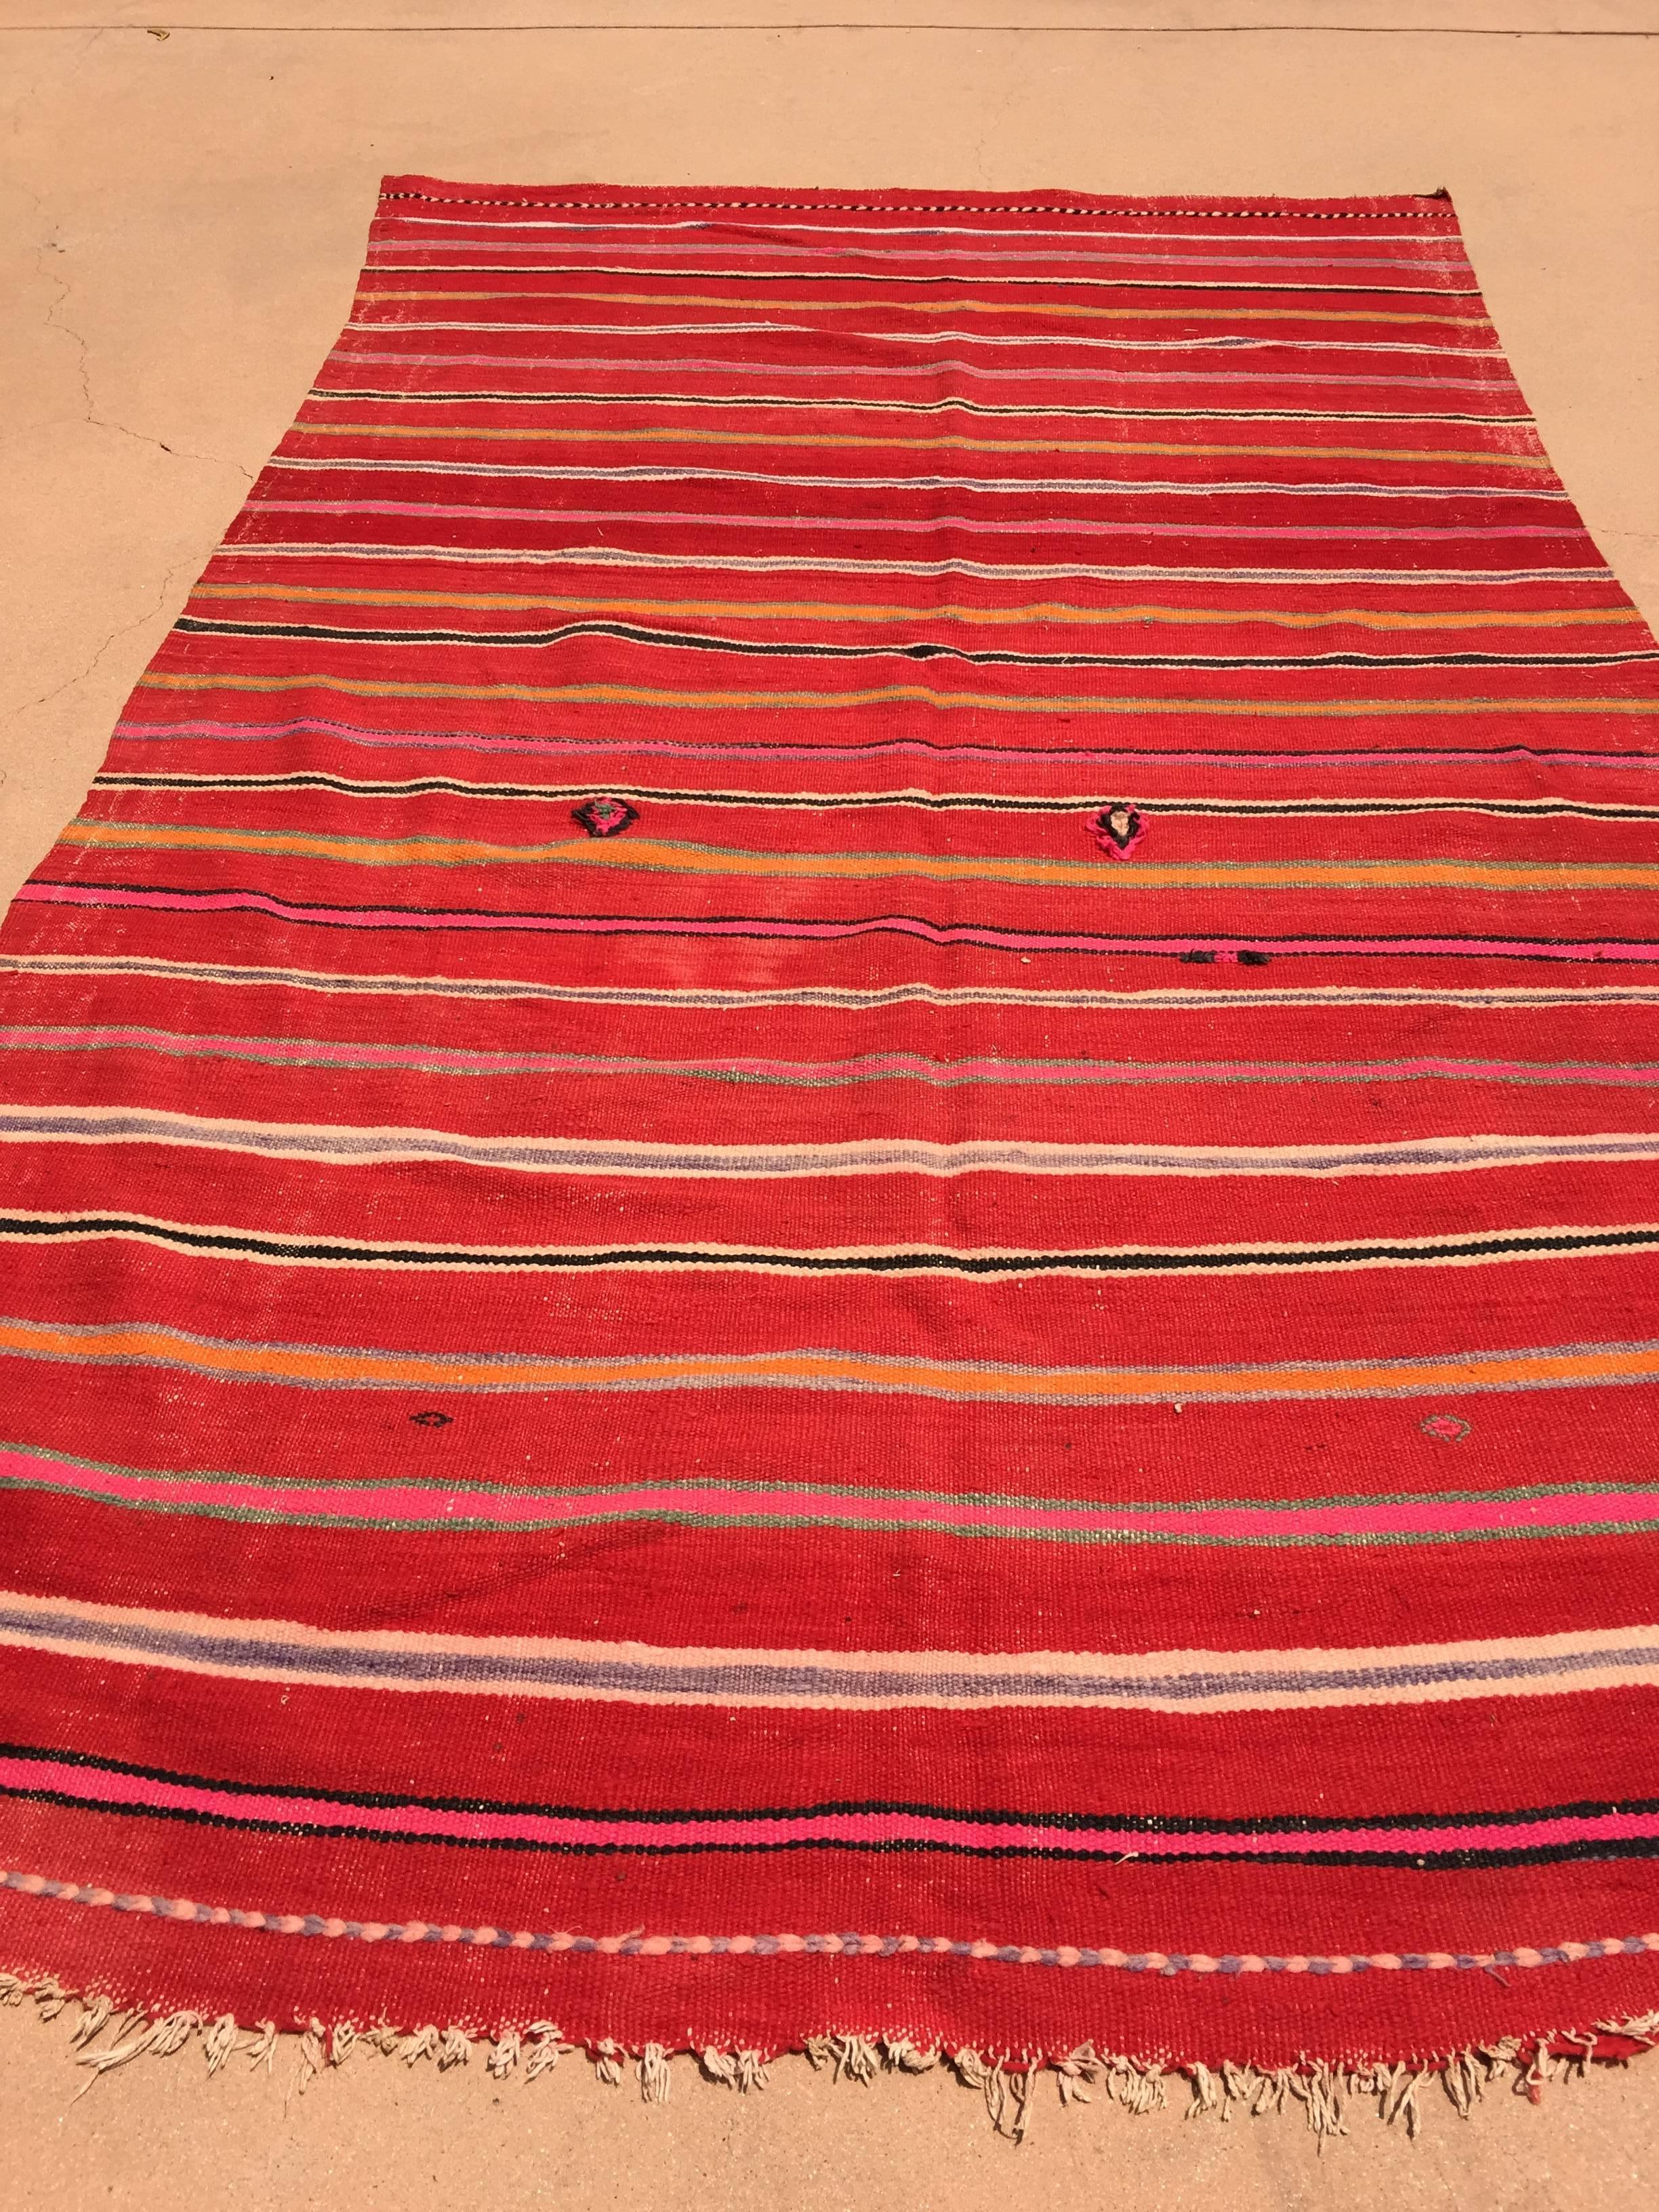 Vintage Moroccan flat-weave Kilim rug.Large size blanket vintage Moroccan rug, handwoven by Berber women in Morocco for their own use.This rug was made using flat-weave technique with linear pattern of alternating stripes in different cors in dark